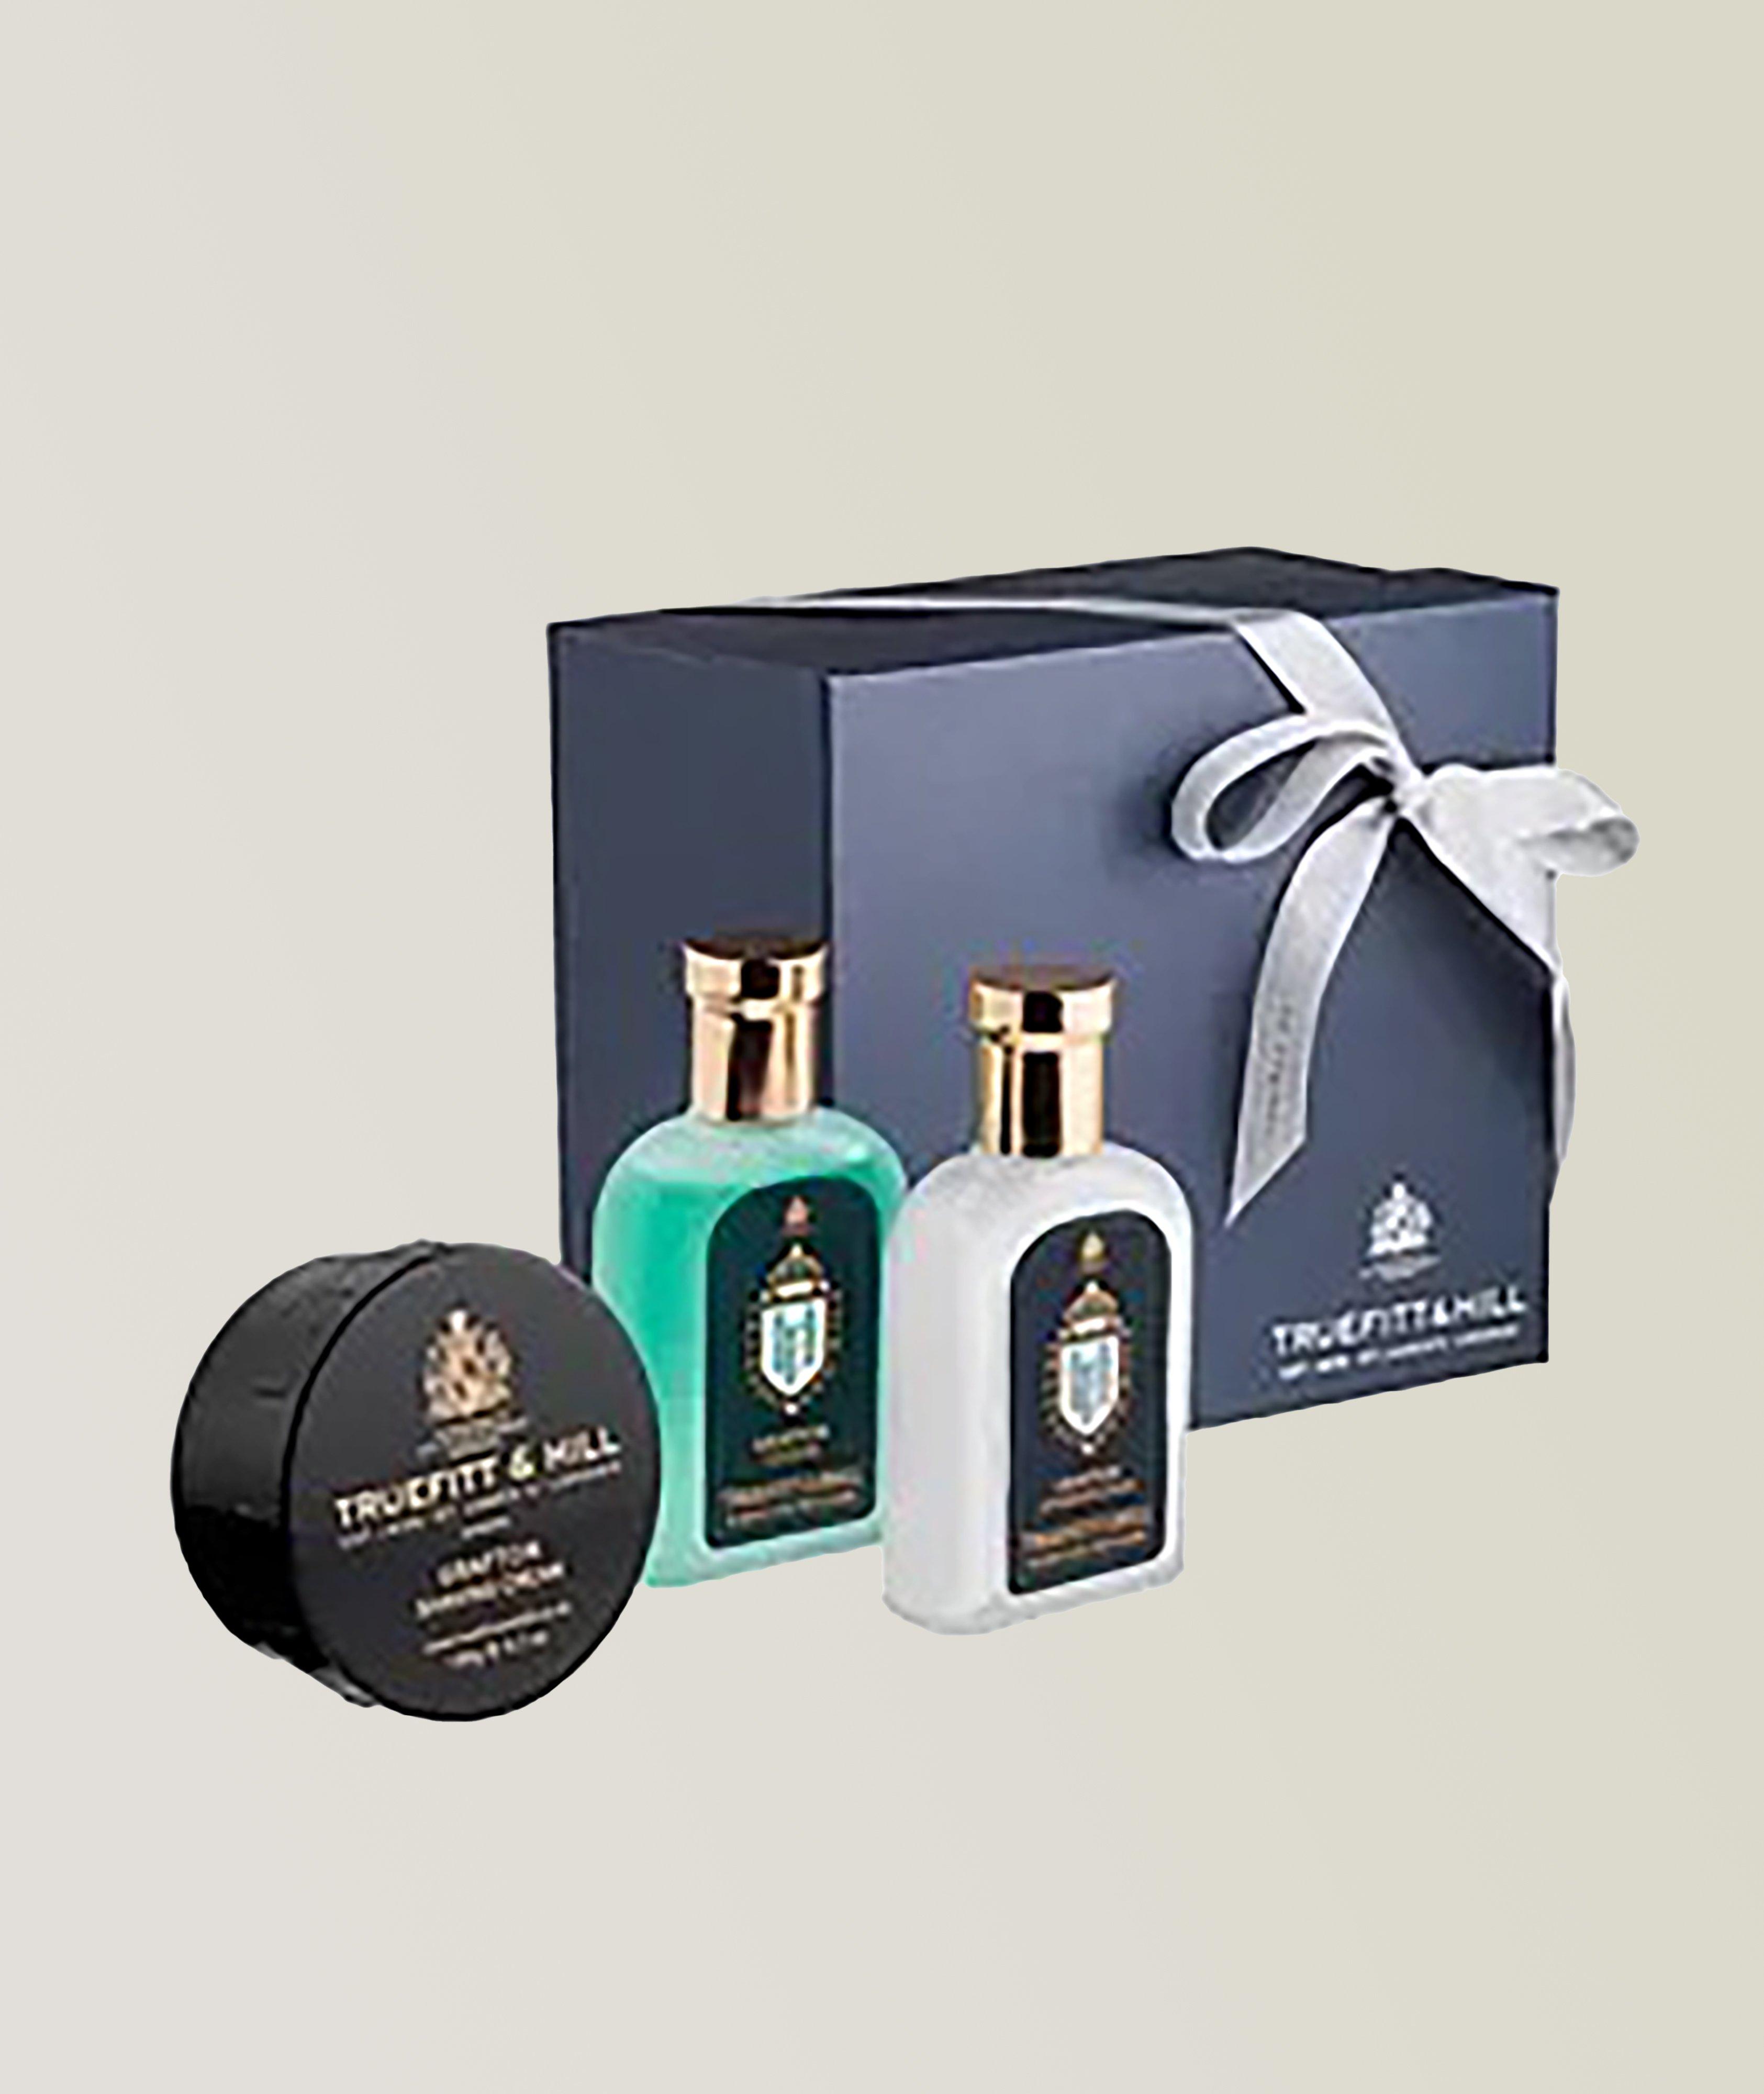 Grafton Classic Shave Gift Set